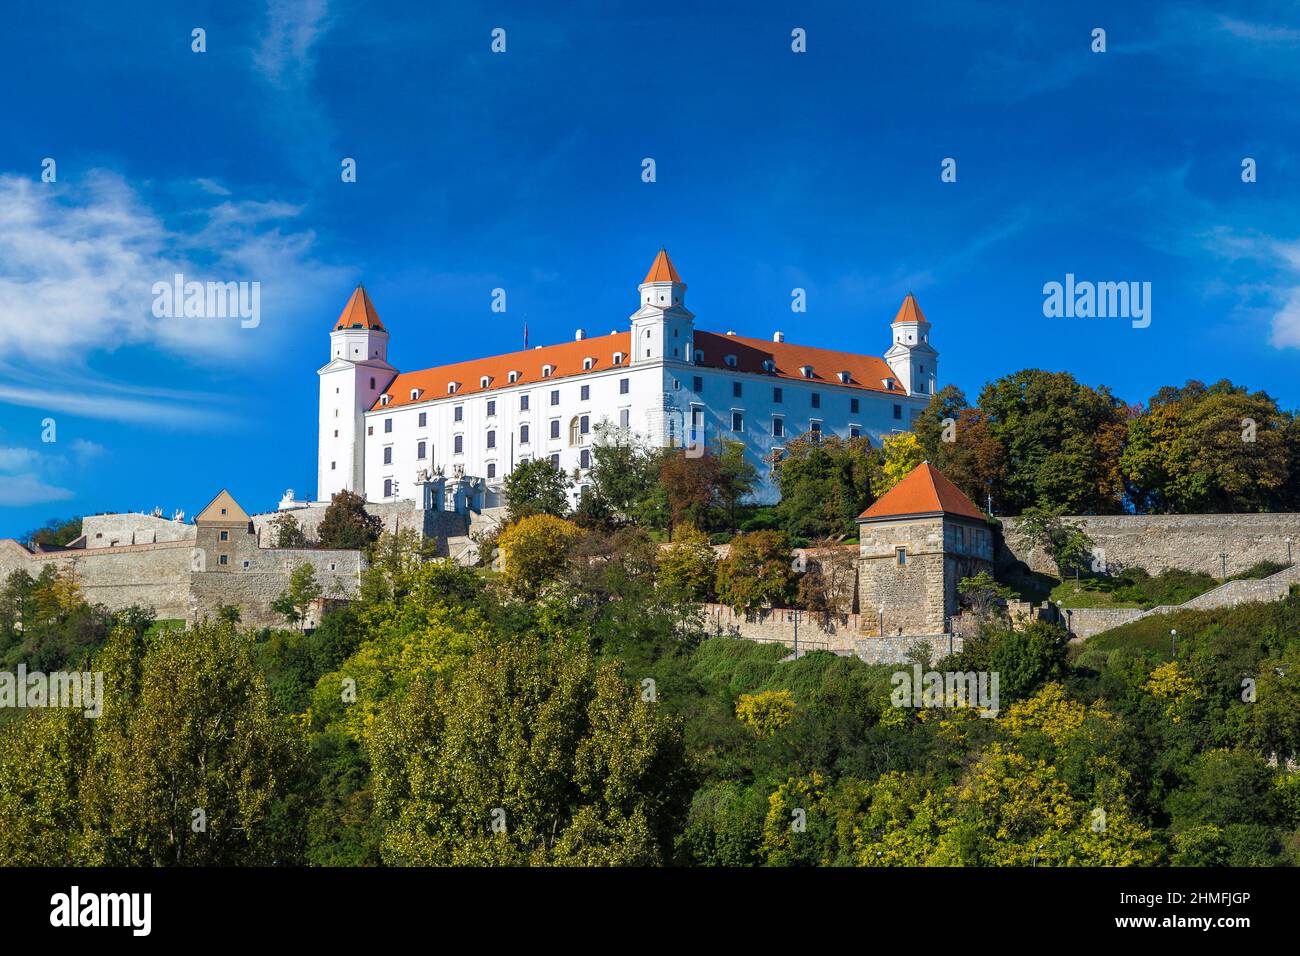 Medieval castle on a hill in a summer day in Bratislava, Slovakia Stock Photo